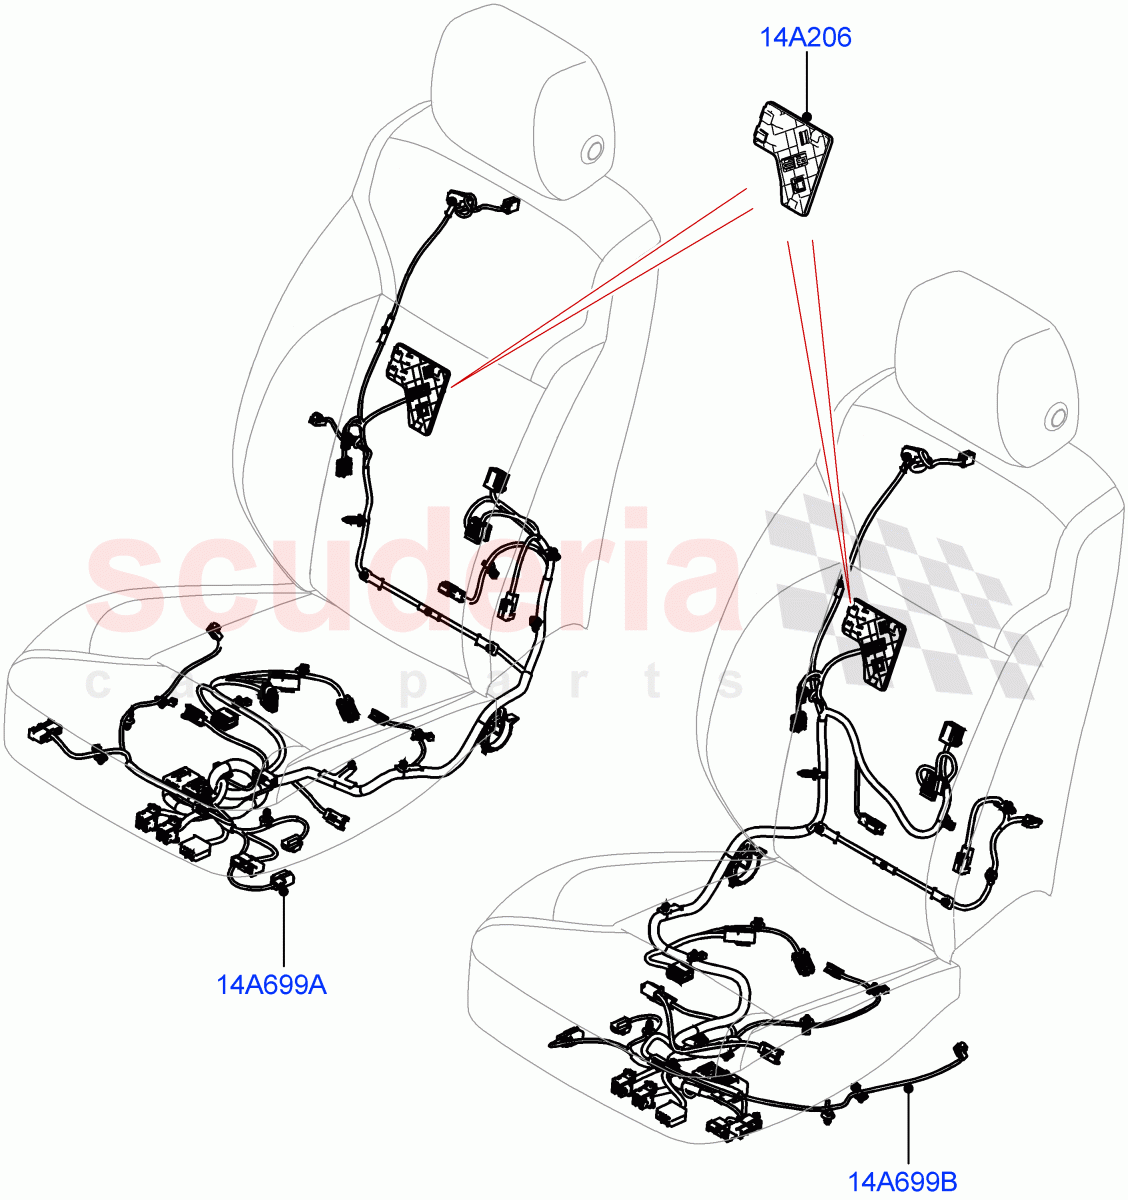 Wiring - Seats(Front Seats)((V)FROMMA000001) of Land Rover Land Rover Range Rover Velar (2017+) [2.0 Turbo Diesel AJ21D4]